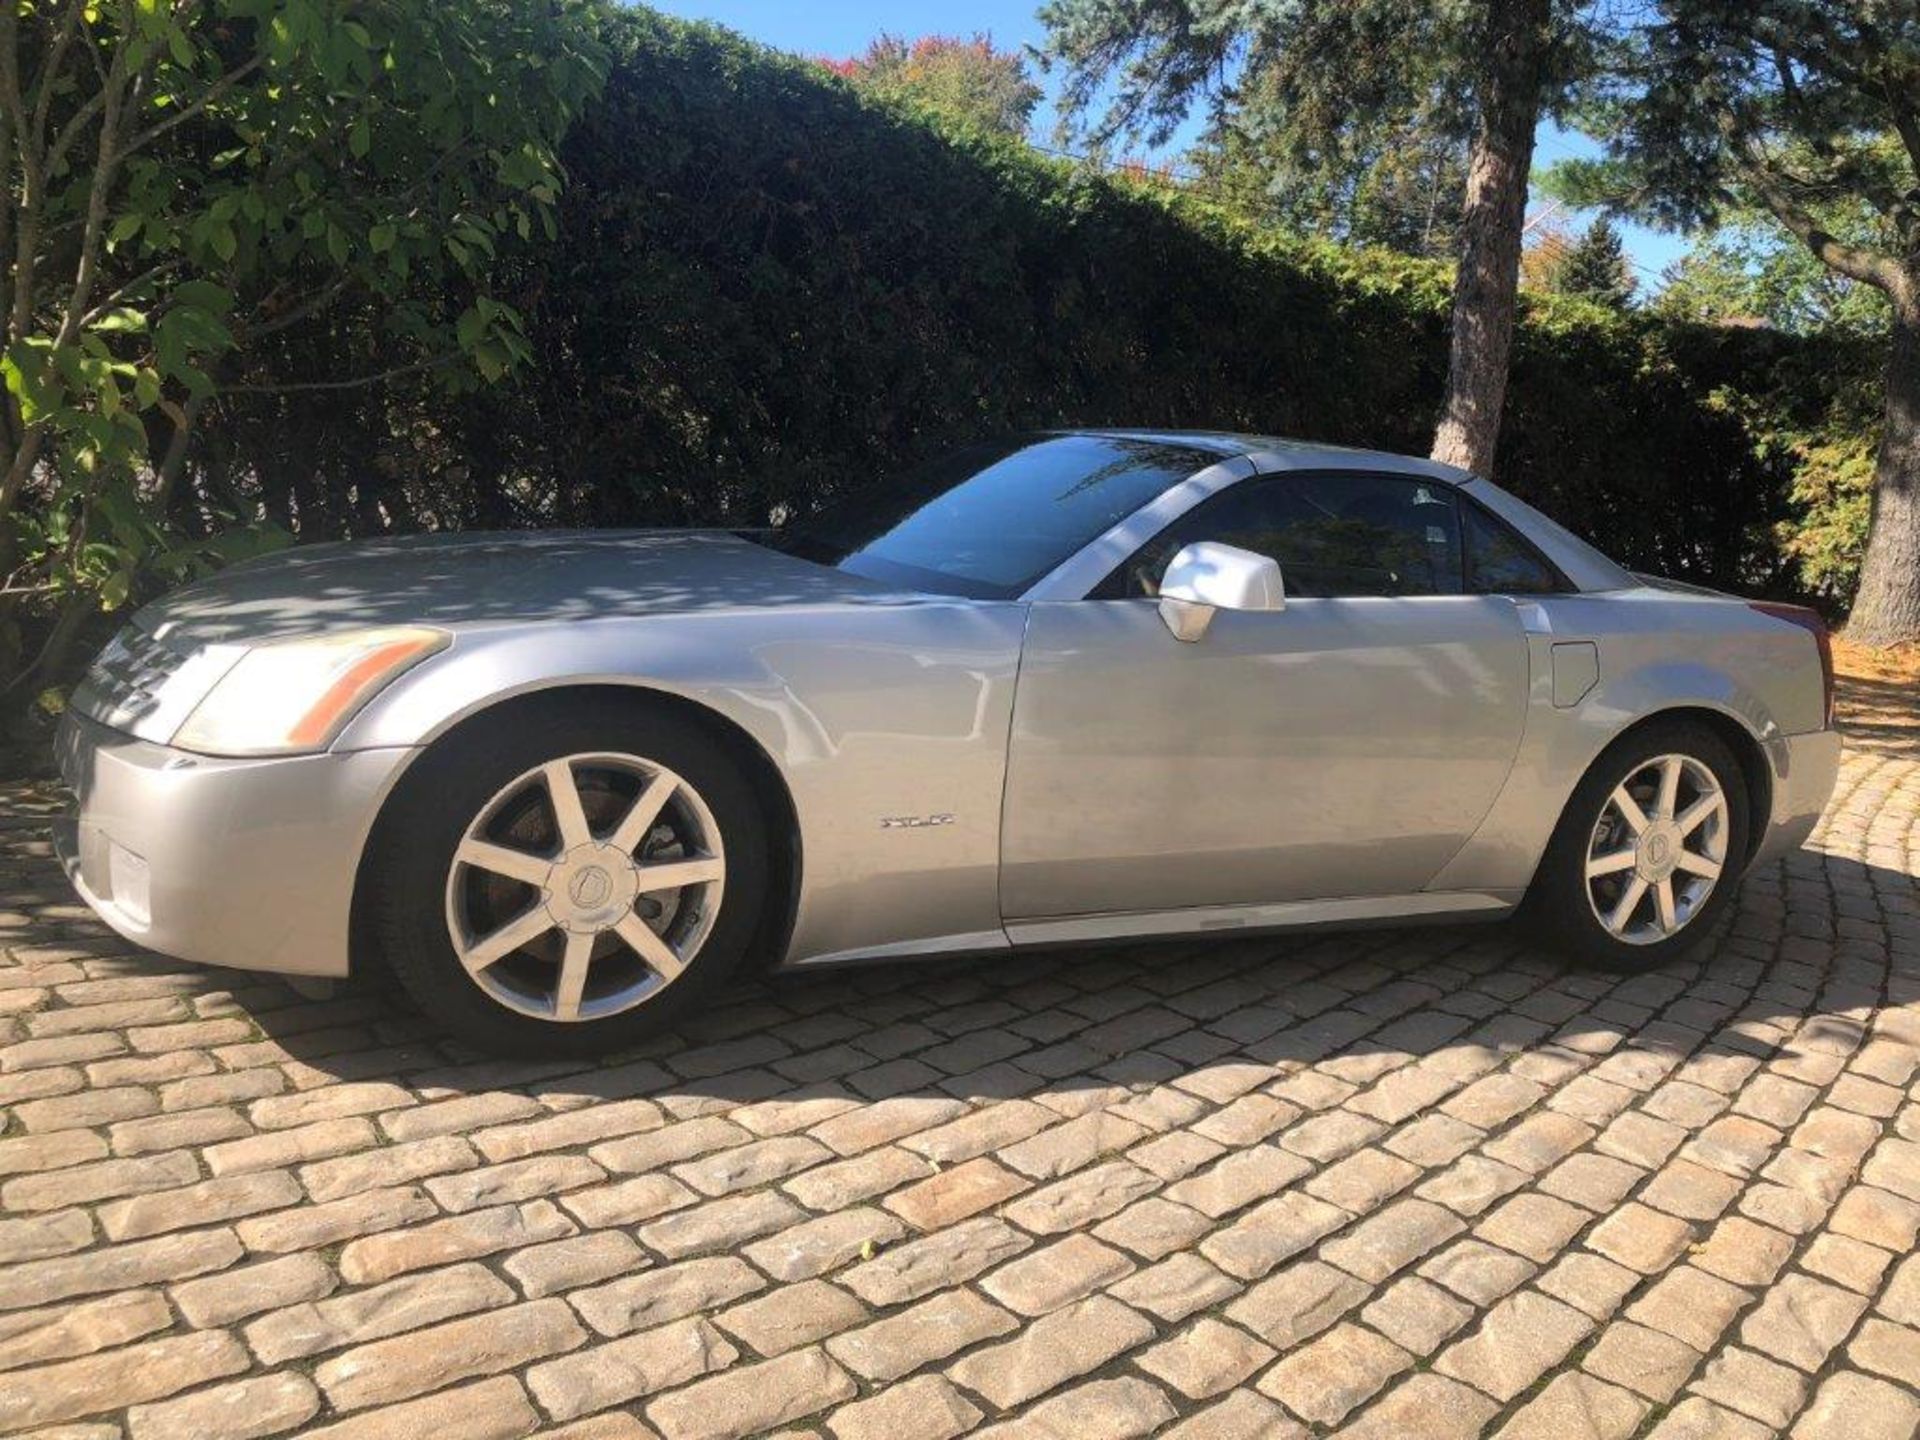 (2005) Cadillac XLR Convertible Fully Equipped. - Image 6 of 10